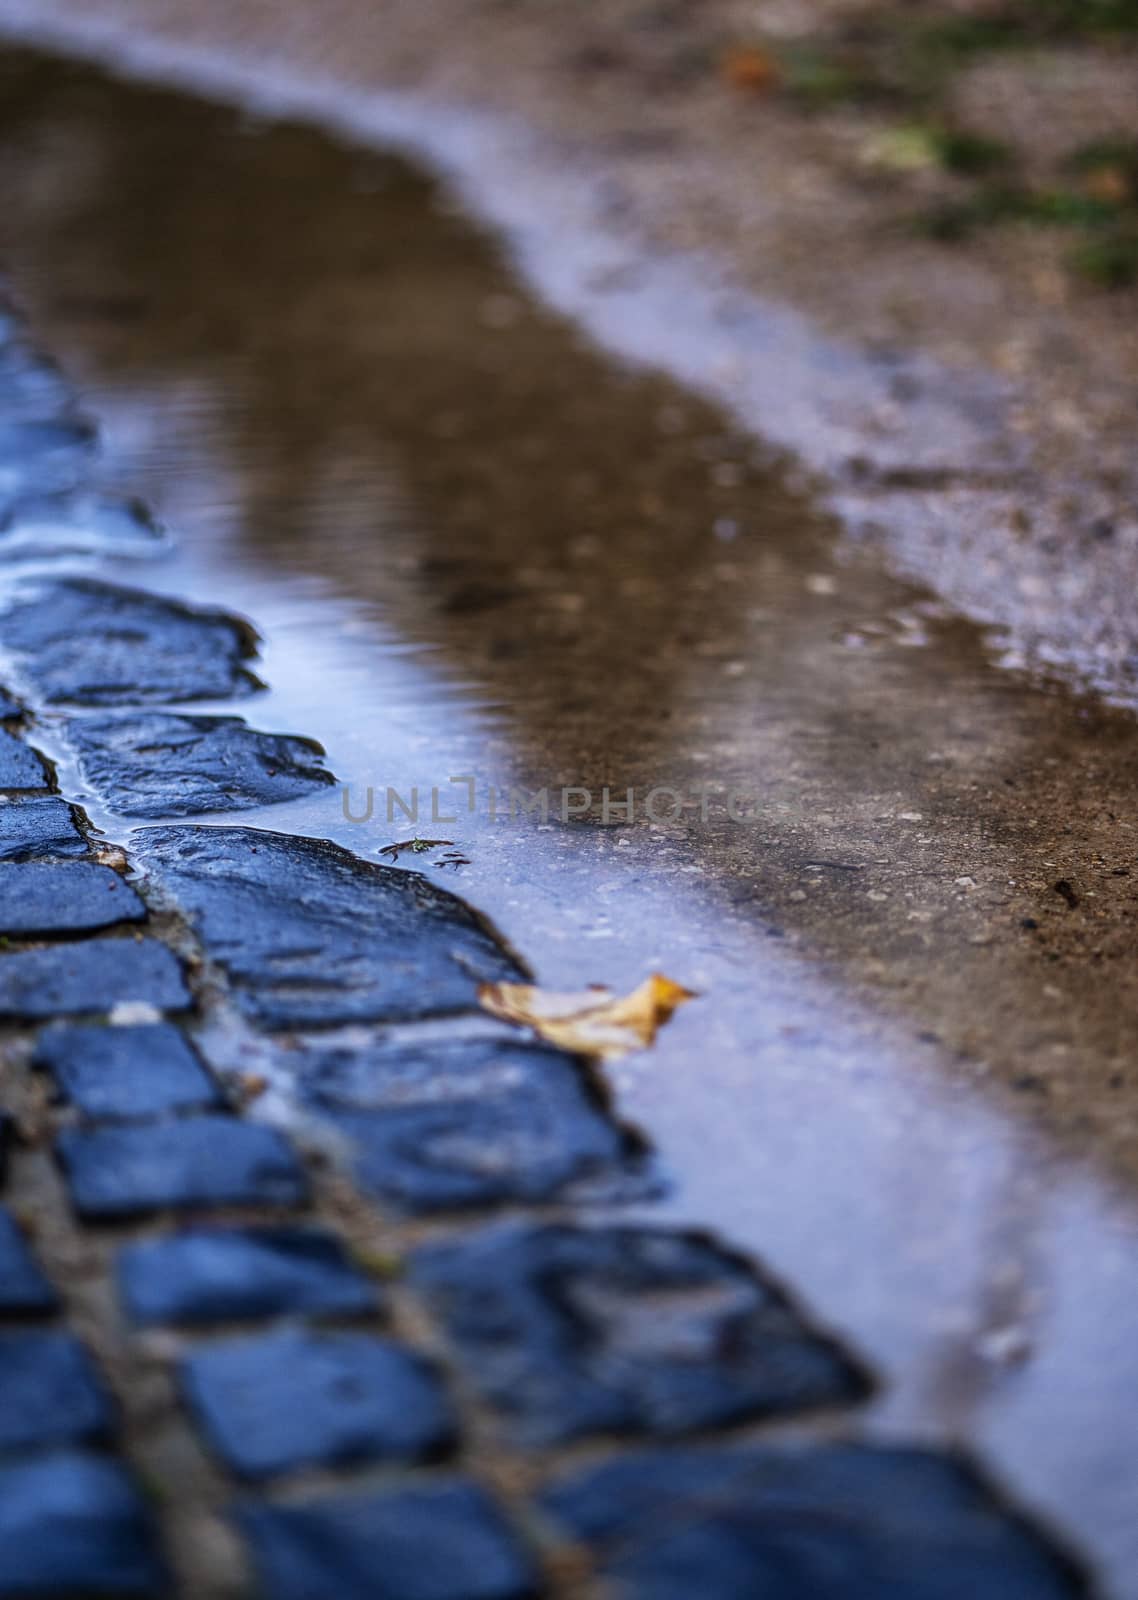 Cobblestones and a puddle by Mendelex